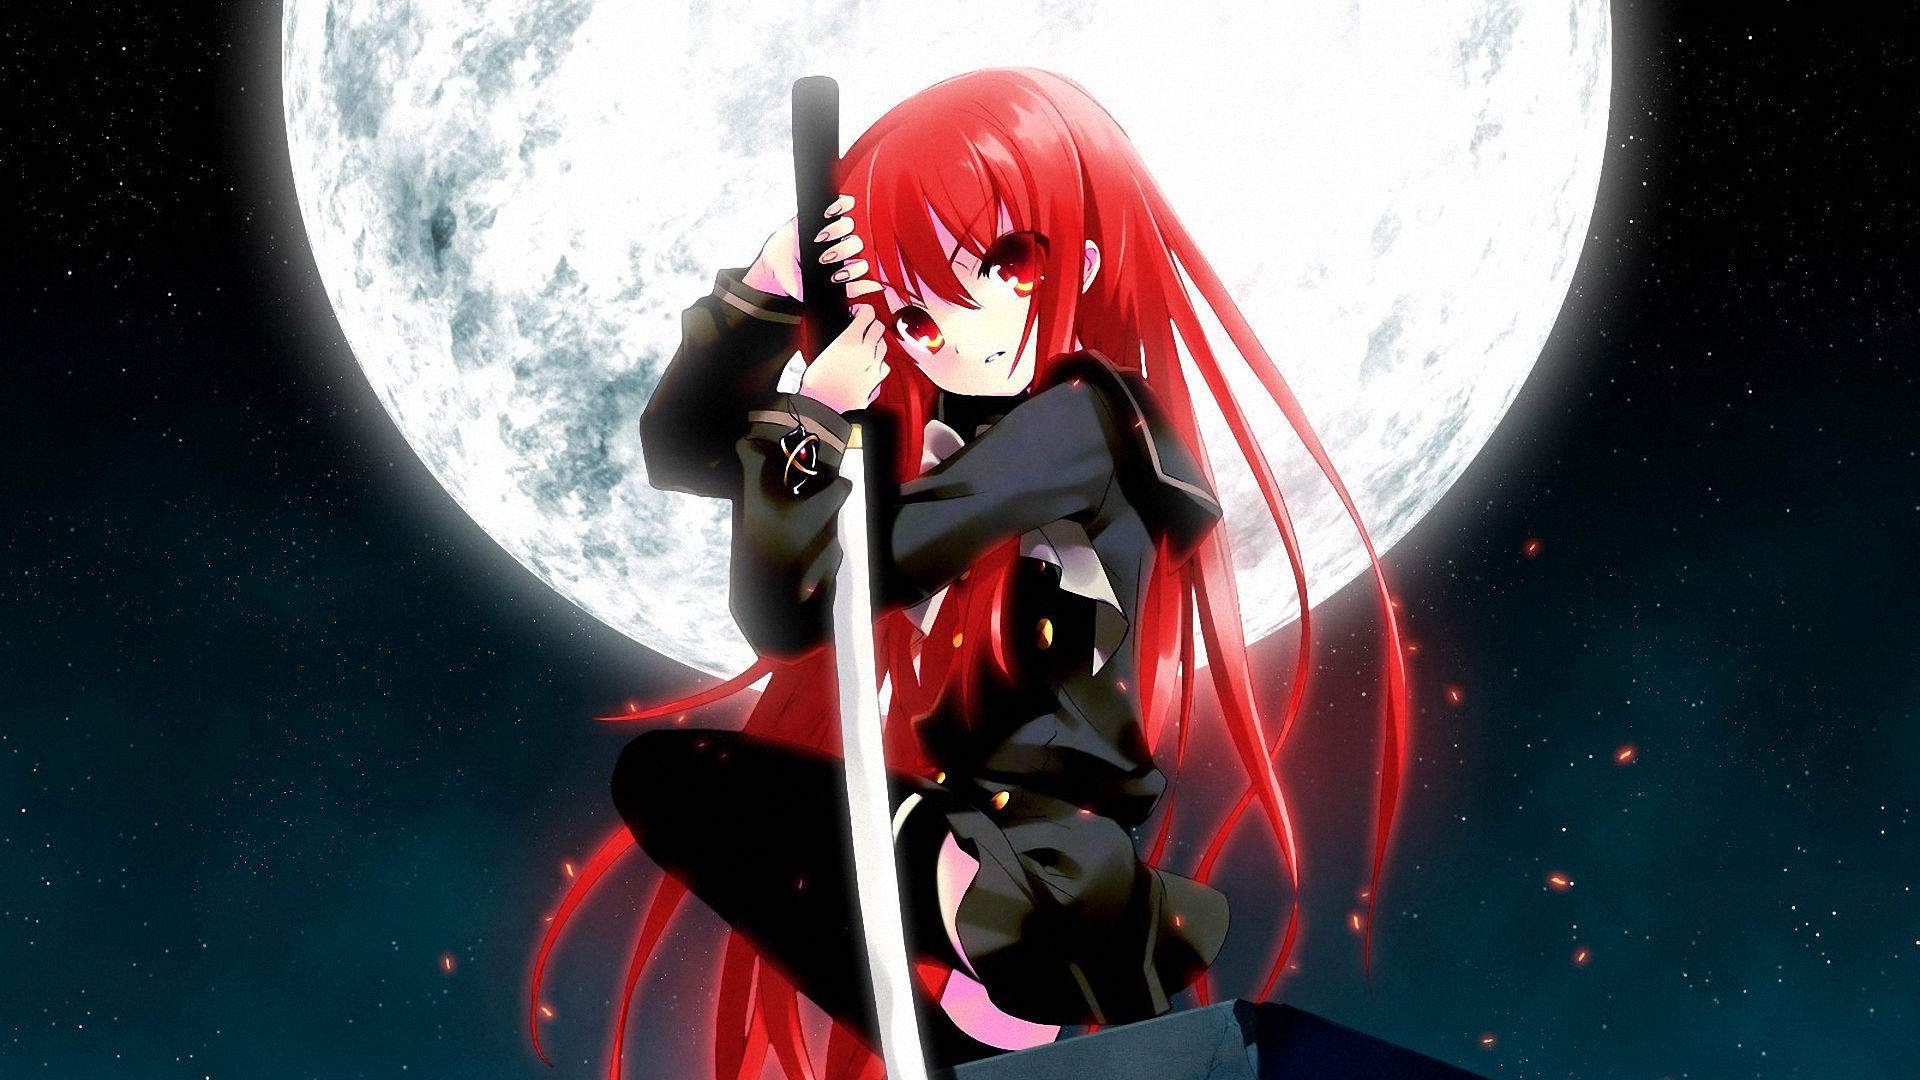 Shana Wallpaper Pictures